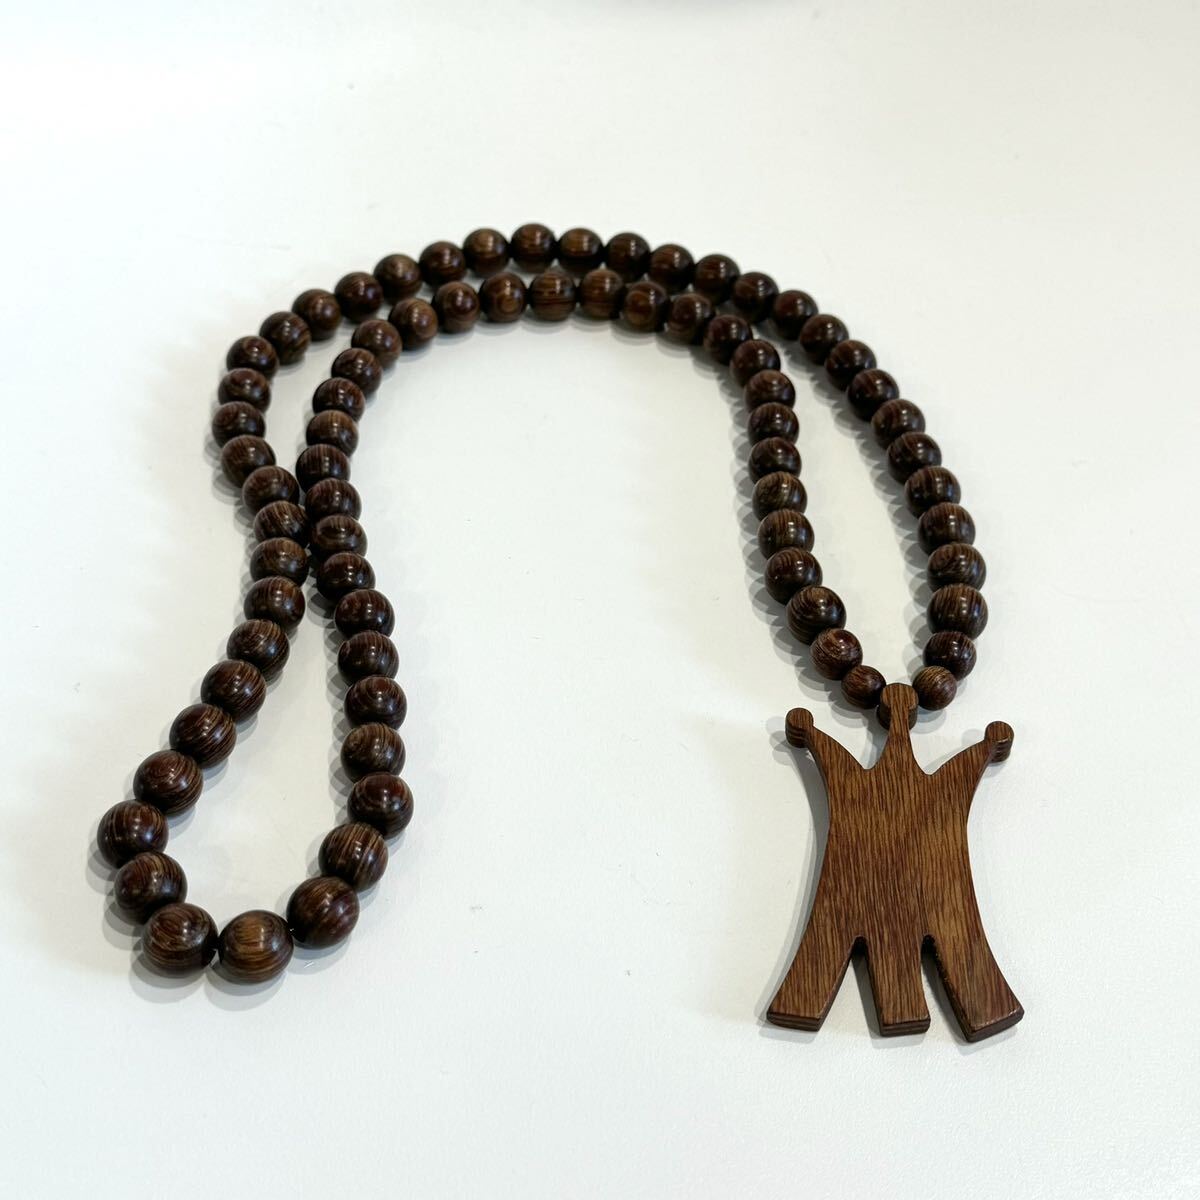  ultra rare reverse side . Vintage! Mac dati wooden beads necklace beautiful goods cheap!